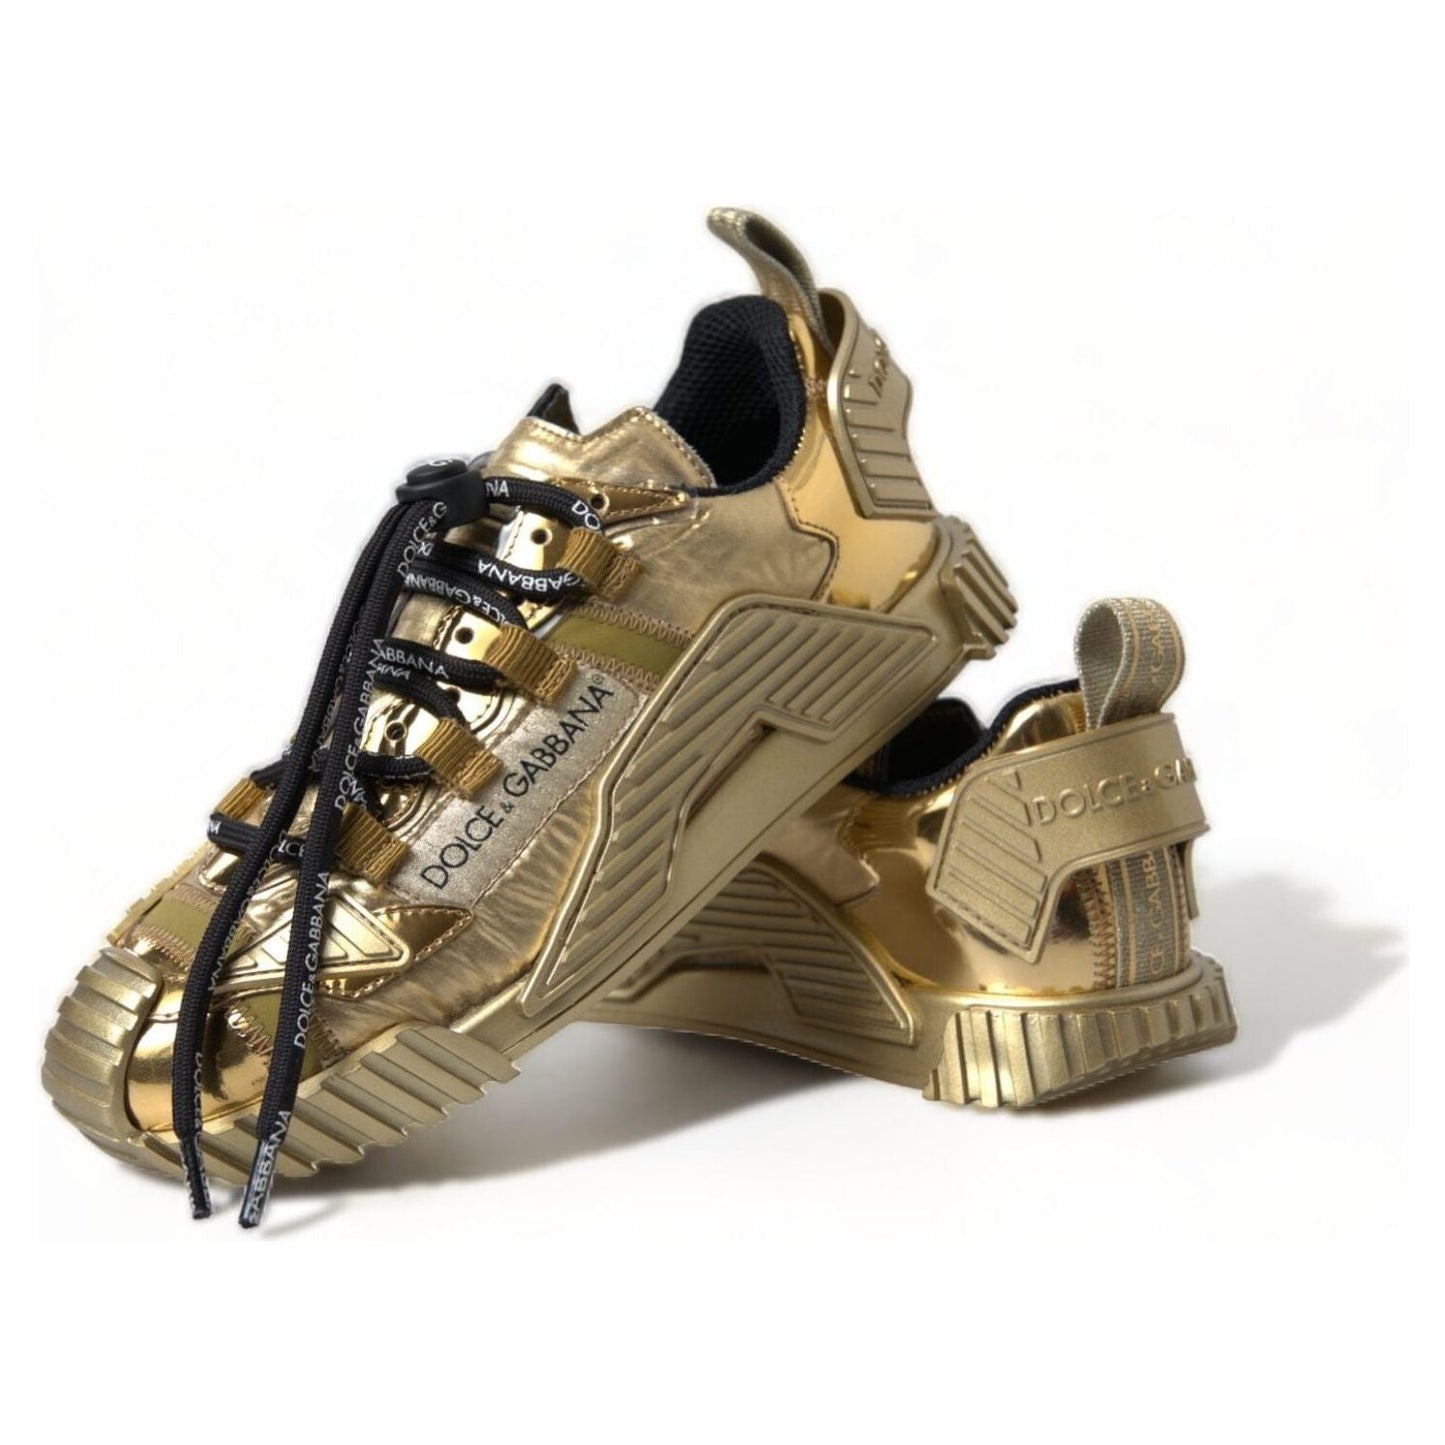 Dolce & Gabbana D&G Gleaming Gold-Toned Luxury Sneakers metallic-gold-ns1-low-top-sneakers-shoes 465A2194-BG-scaled-615abc58-cde.jpg